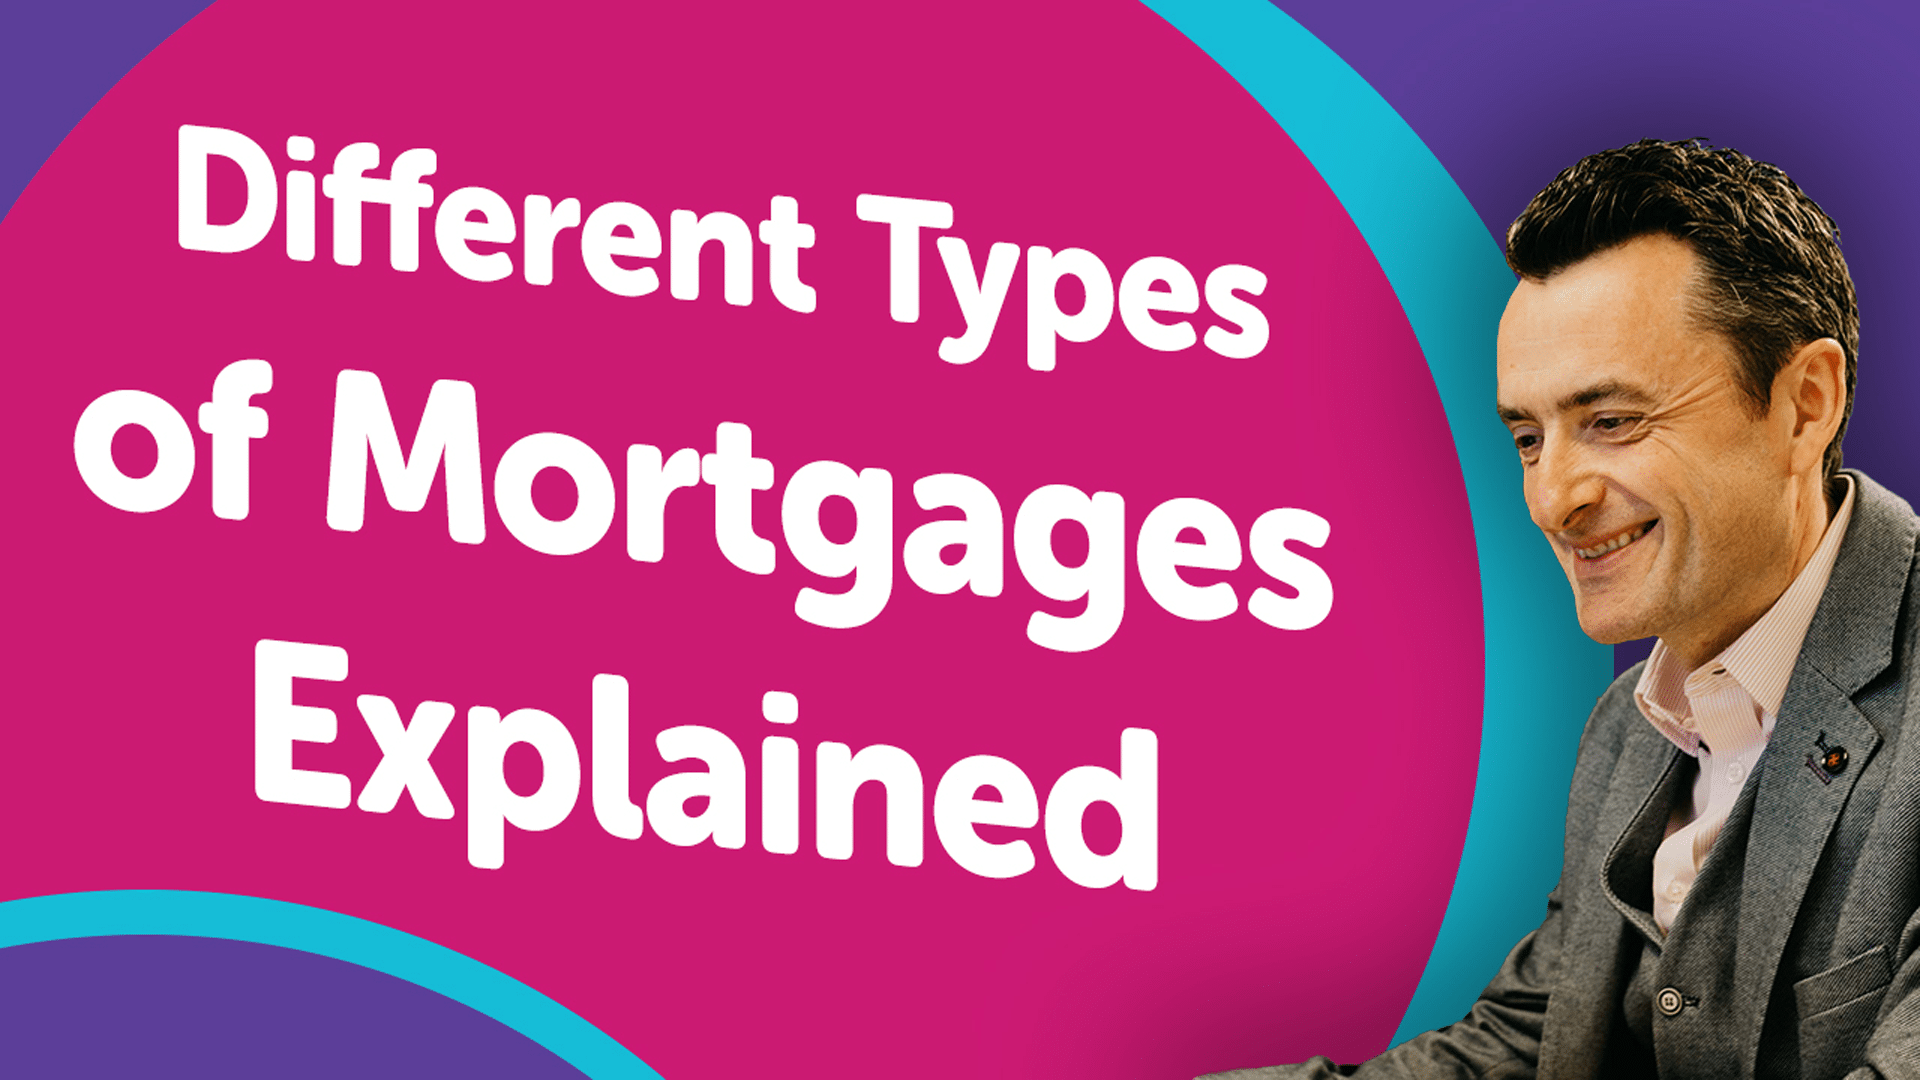 Difference Types of Mortgages Explained